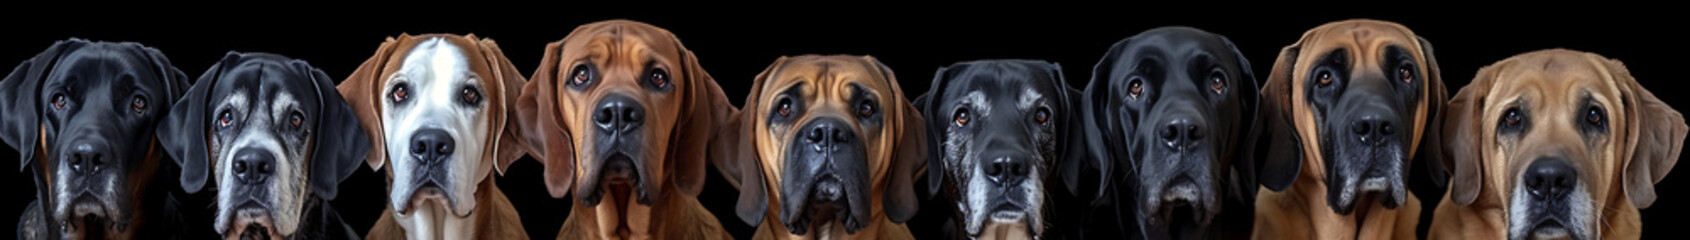 Group of sitting old dogs of different breeds on a black background panorama photo